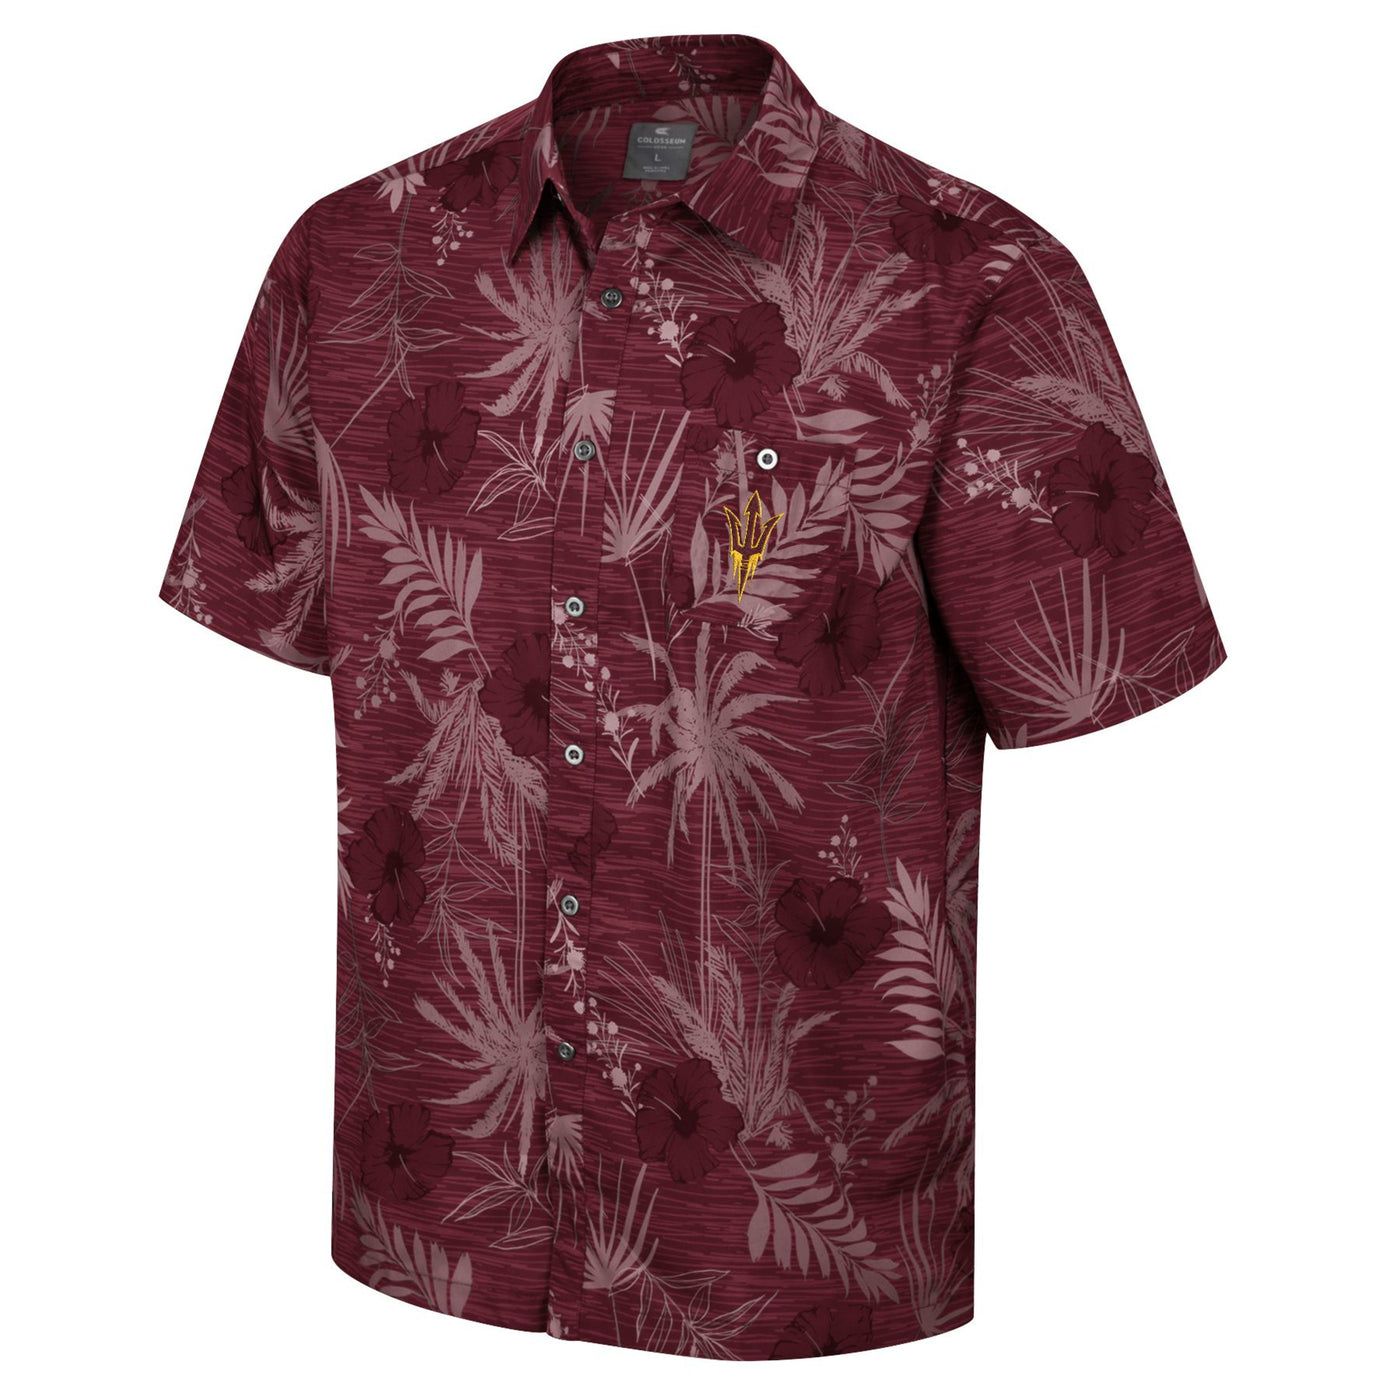 ASU maroon button up with a floral and foliage pattern. There is a gold outline of a pitchfork on the pocket.